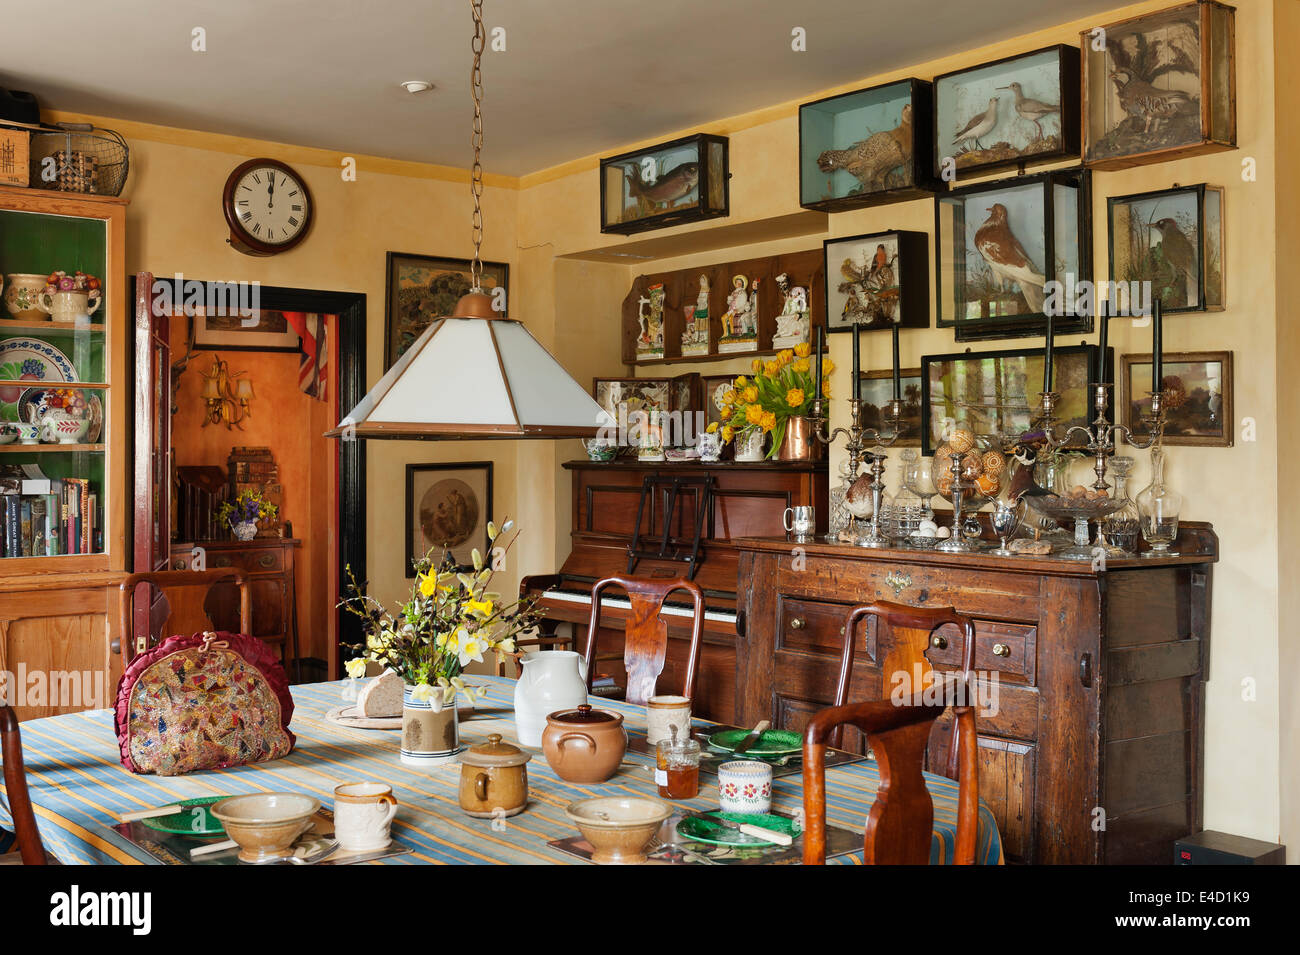 Glass taxidermy cases line a wall in a charming country kitchen stuffed with assorted antiques and unusual crockery Stock Photo